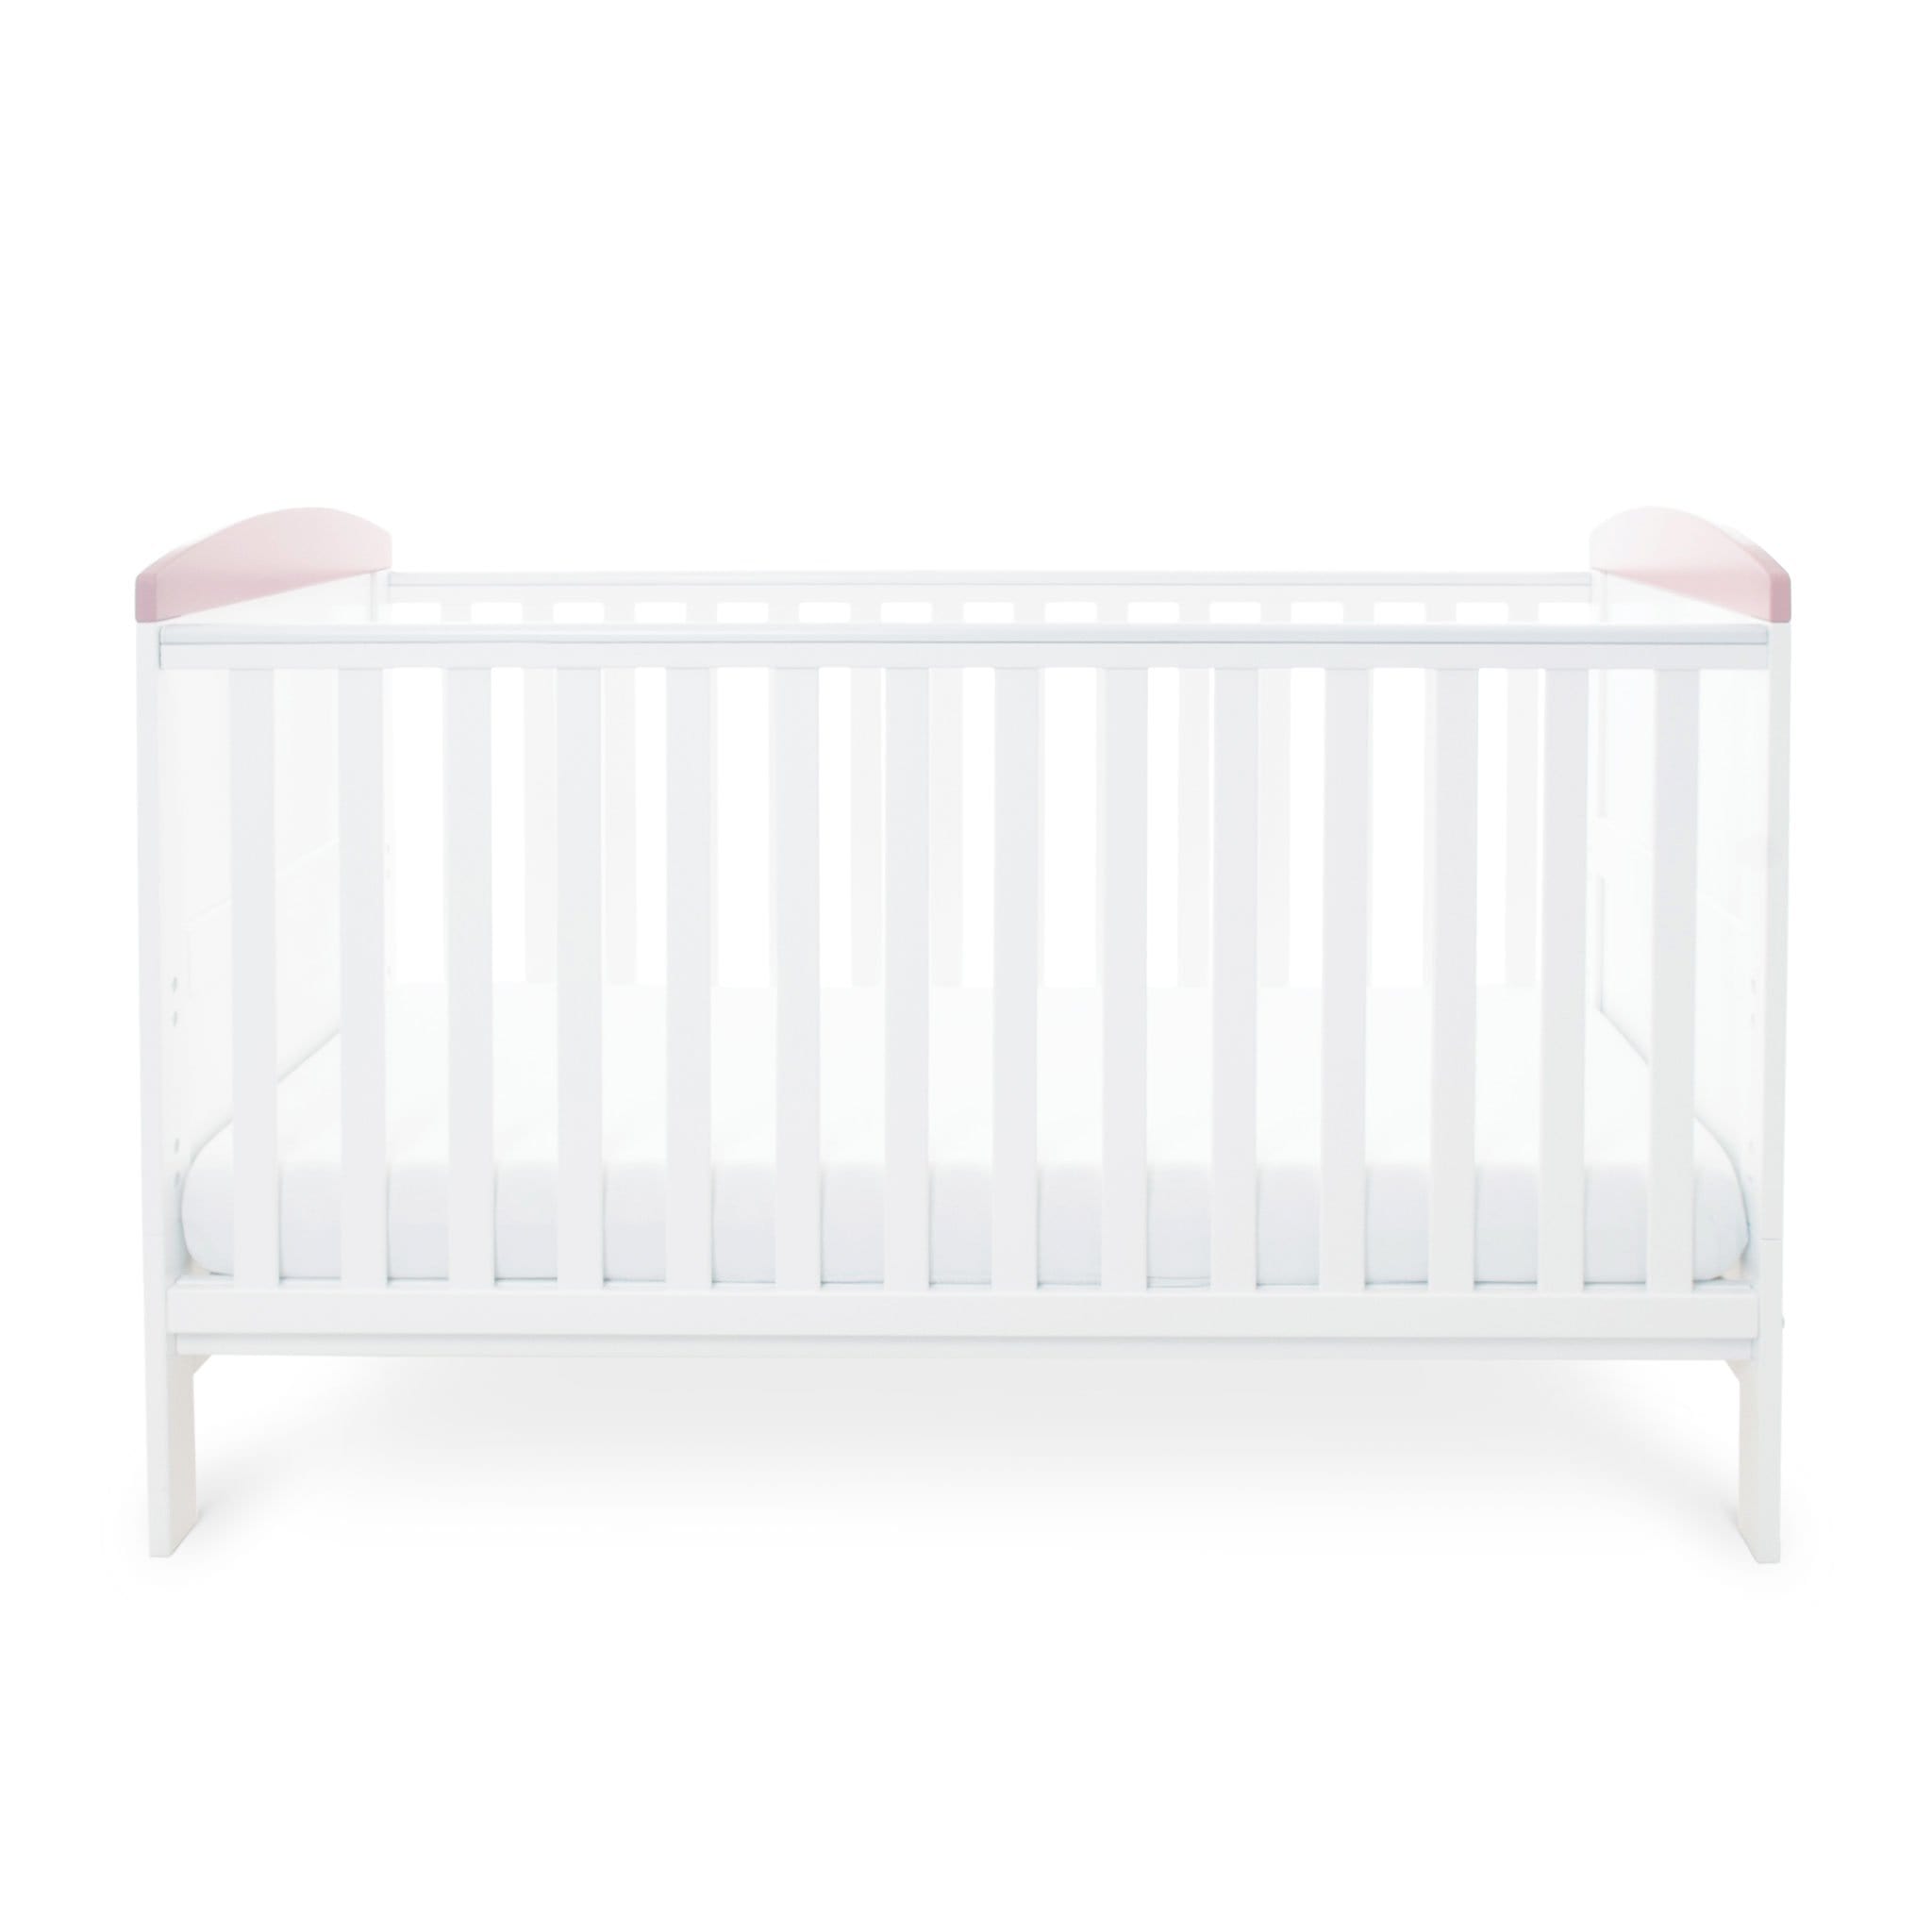 Ickle Bubba Cot Beds Ickle Bubba Coleby Style Cot Bed Elephant Love Pink